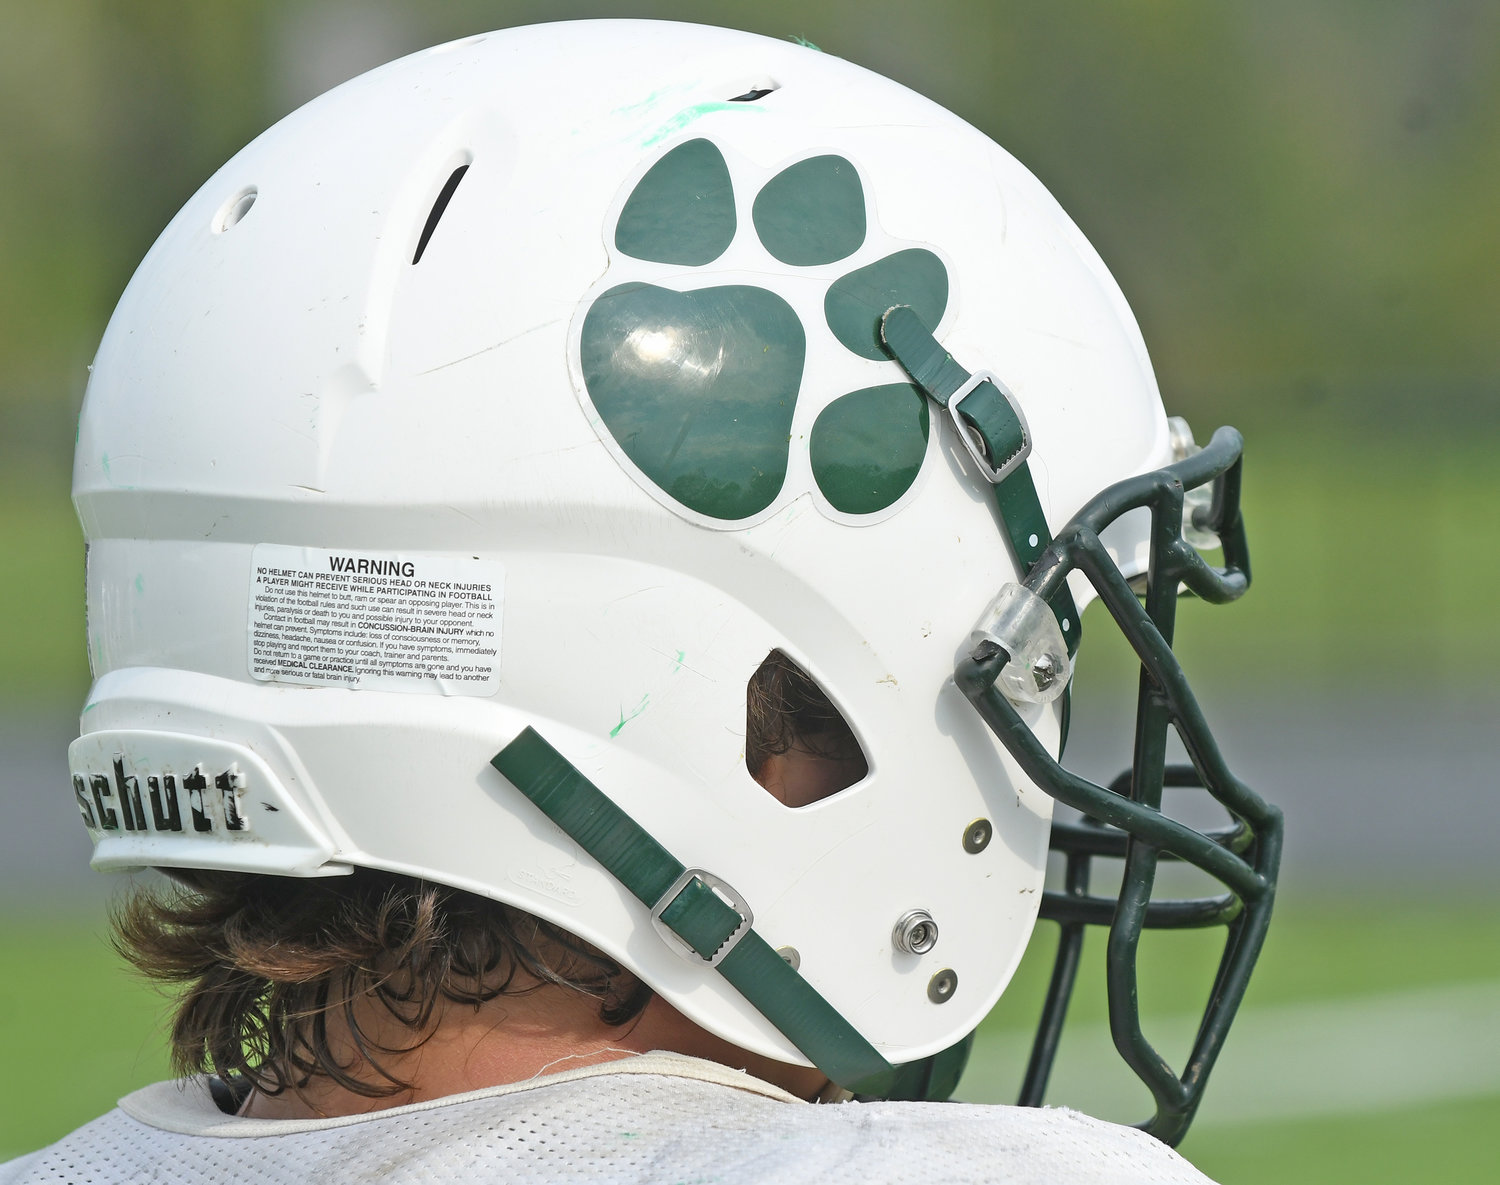 The Adirondack football team is made up of mostly sophomores and juniors during the fall 2022 season.